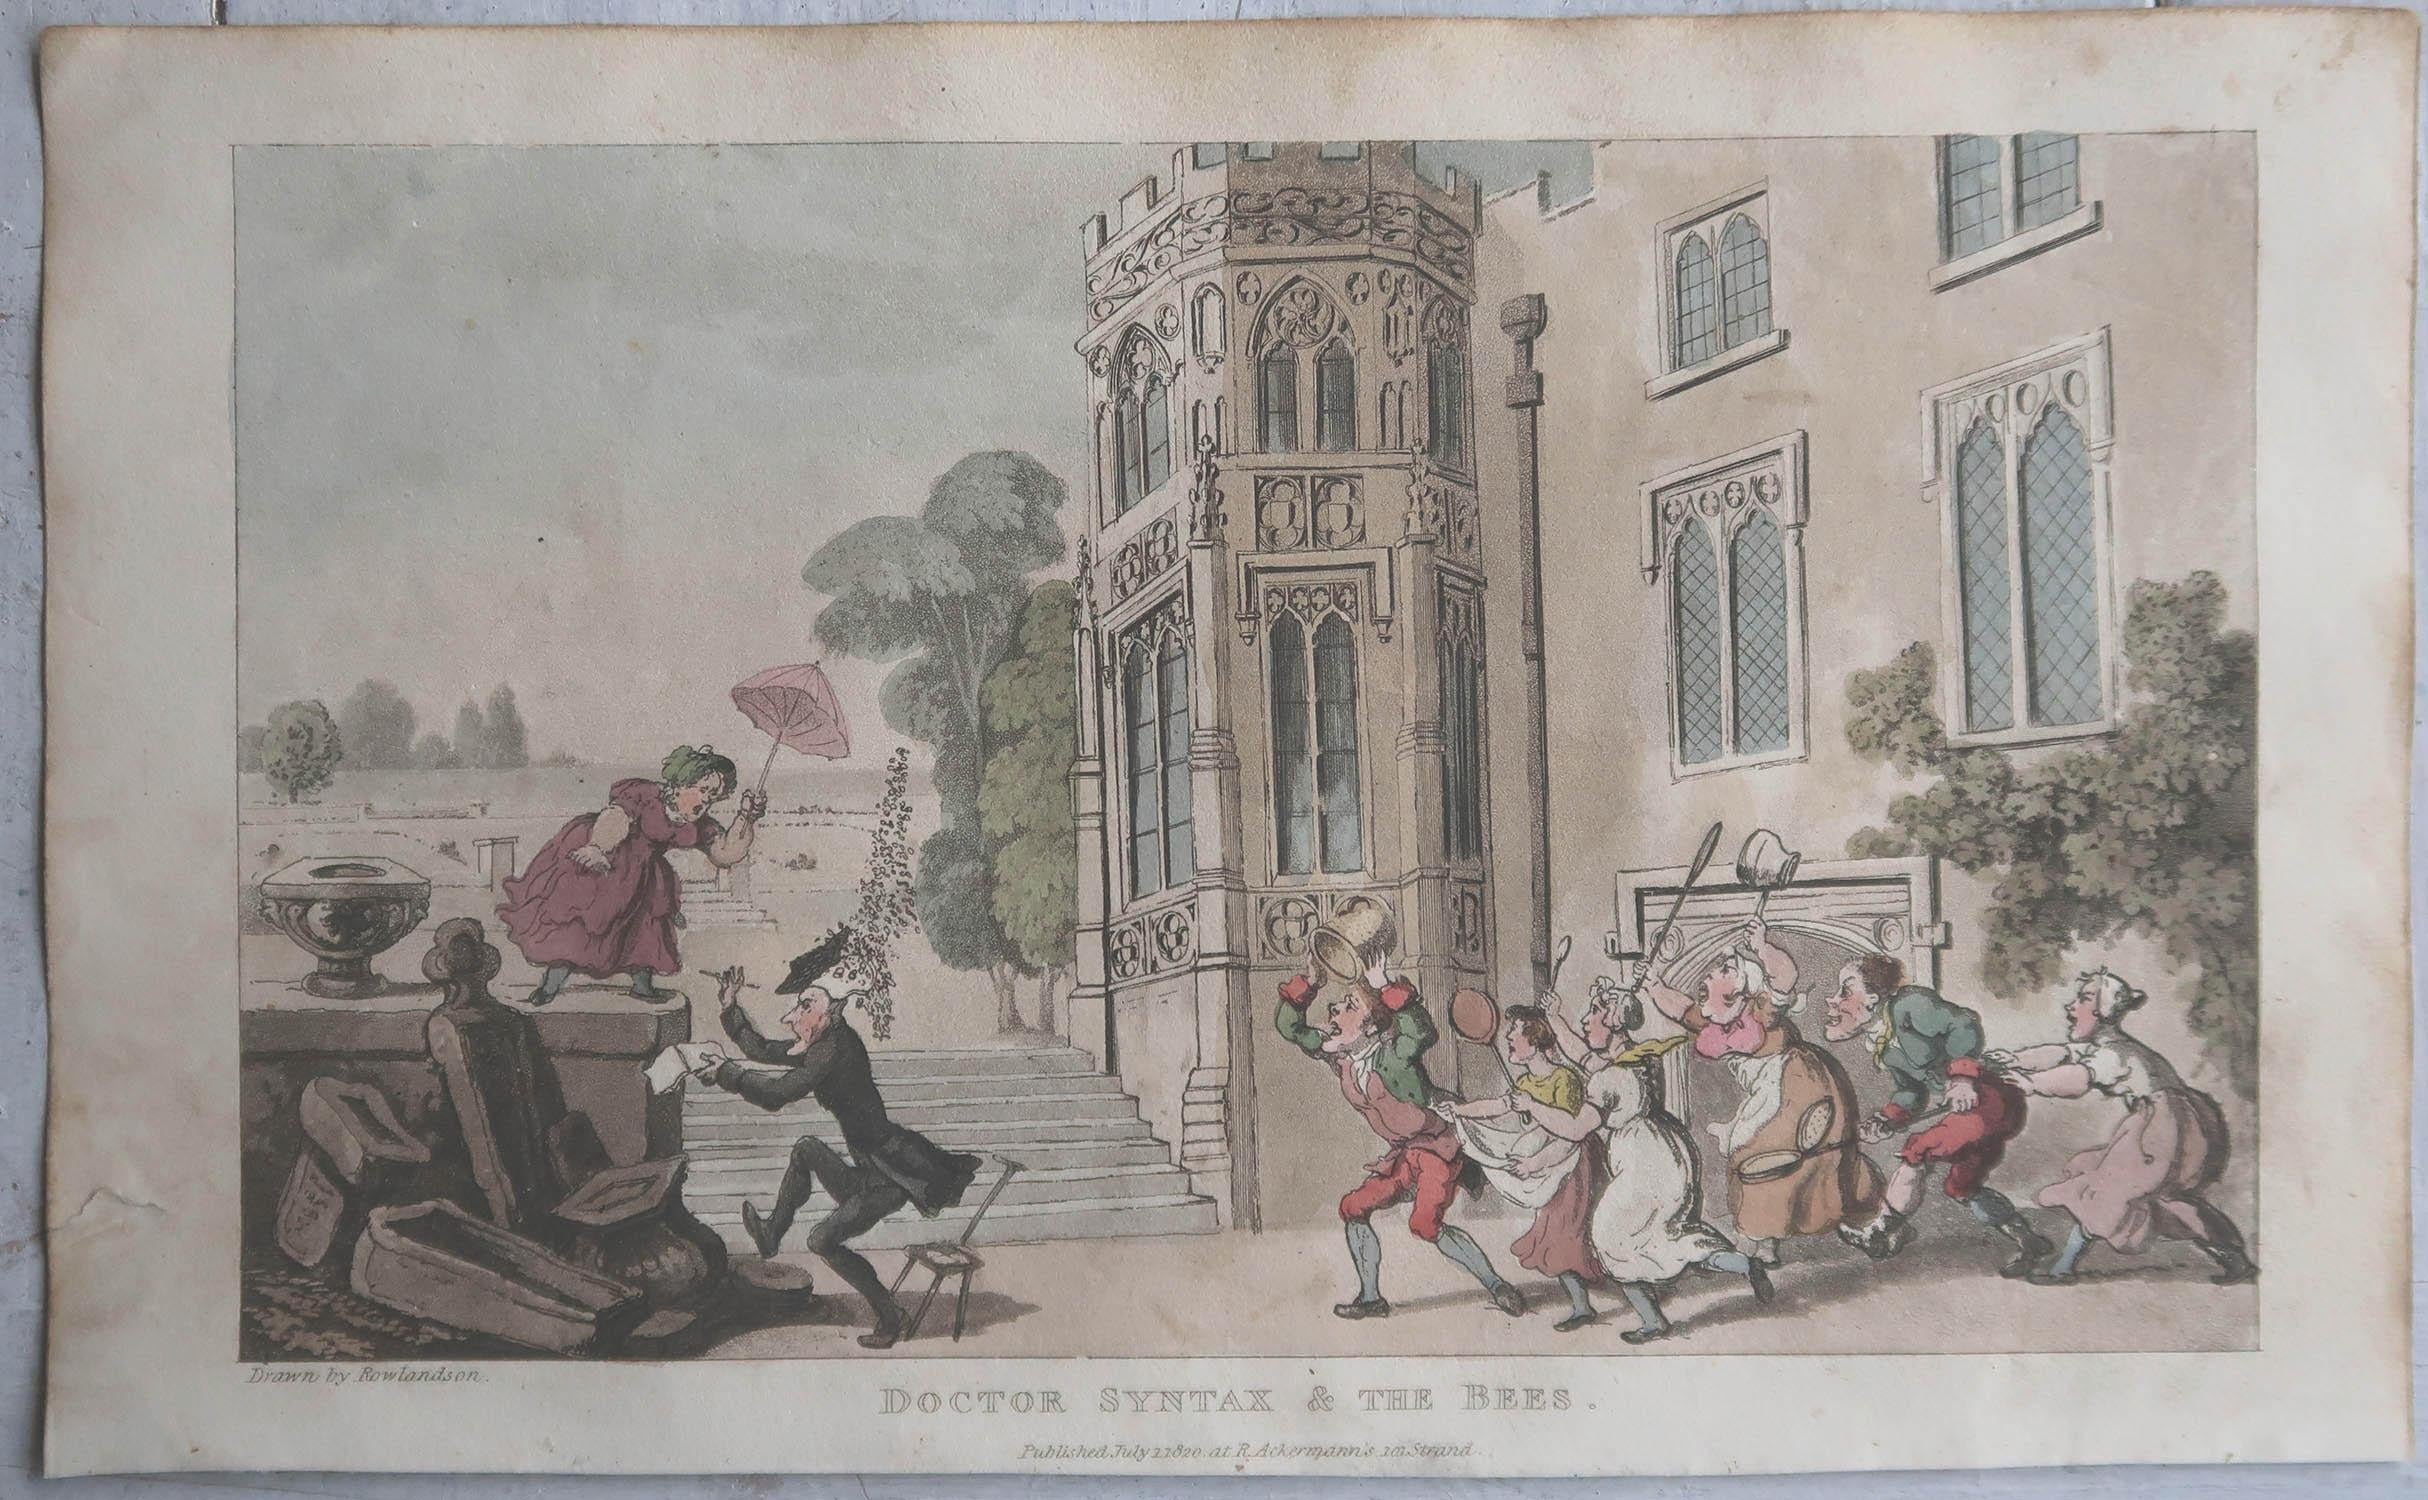 Georgian Original Antique Print After Thomas Rowlandson, Syntax & the Bees 1820 For Sale